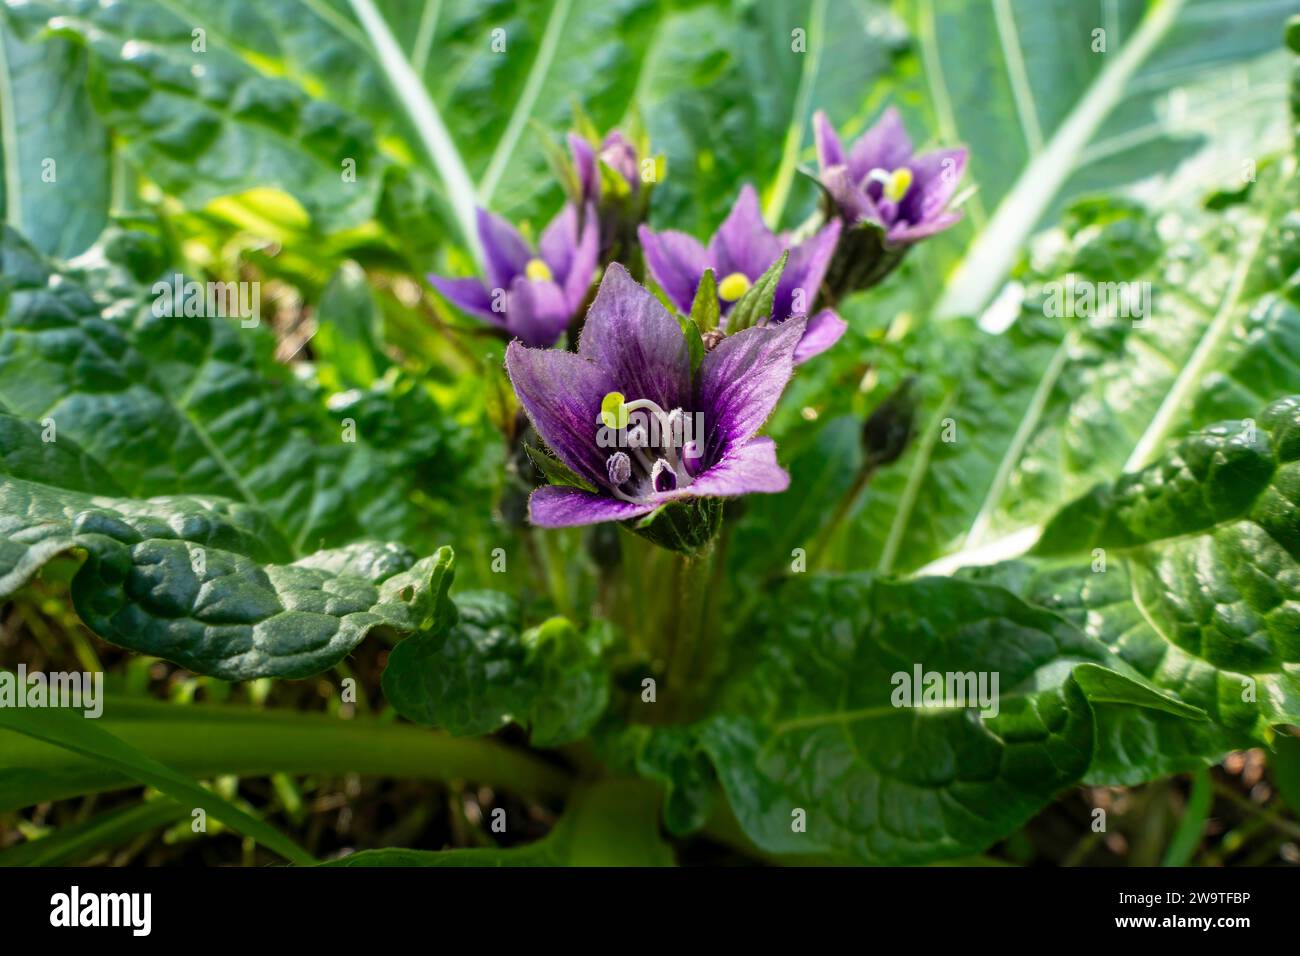 Violet flowers of wild Mandragora plant among green leaves close-up Stock Photo